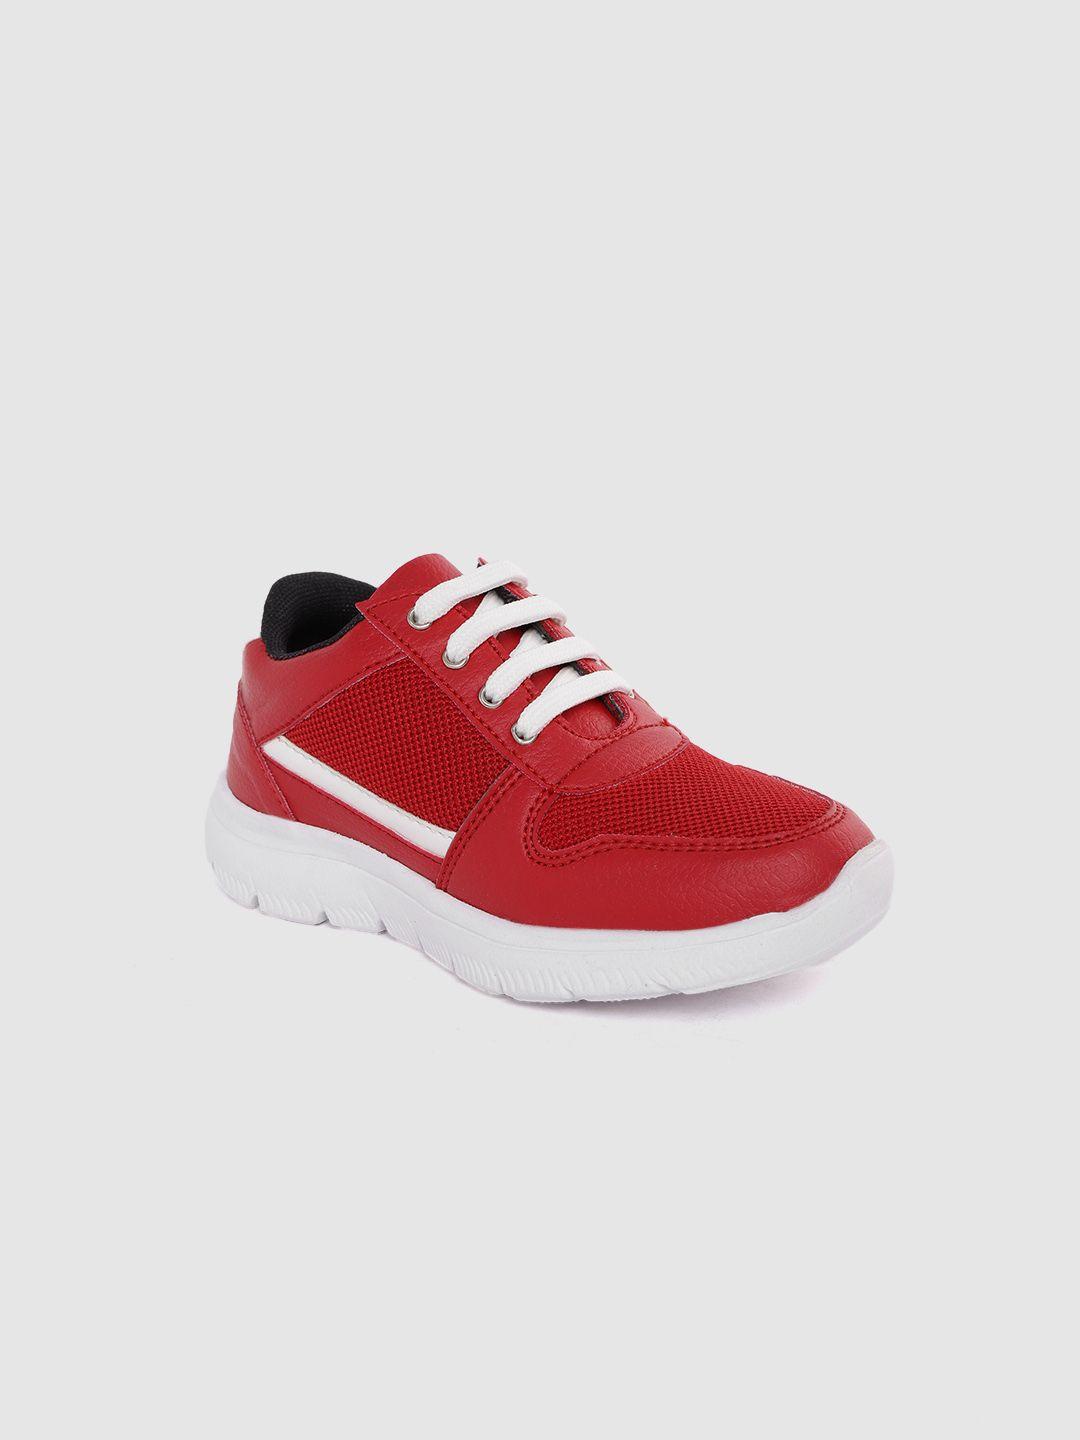 yk boys red woven design sneakers